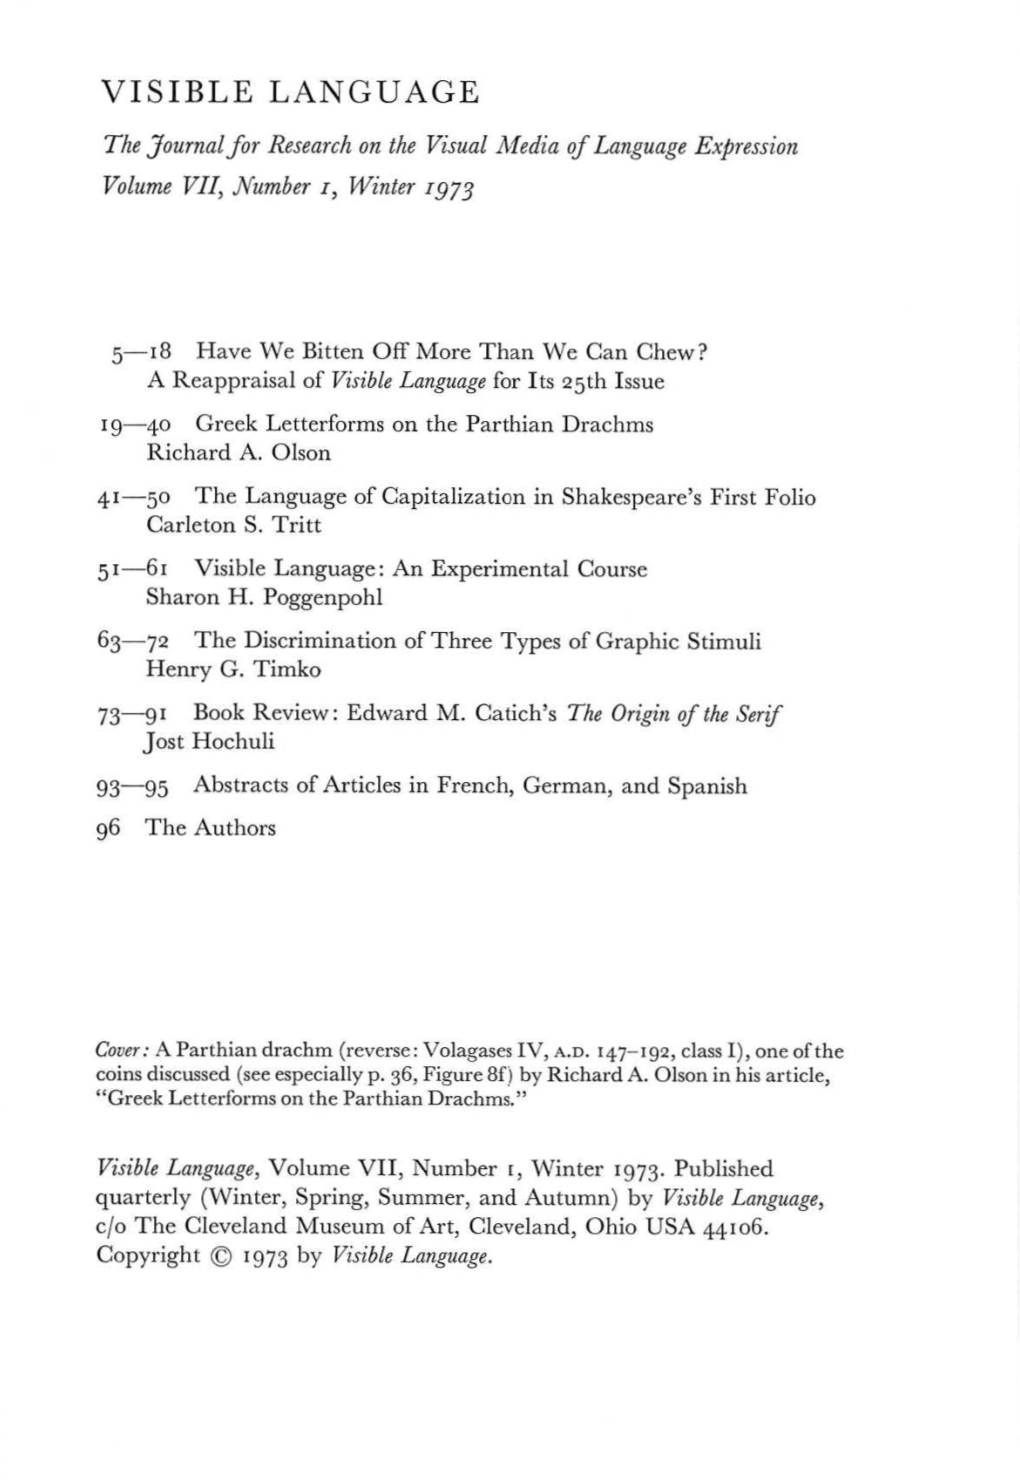 VISIBLE LANGUAGE the Journal for Research on the Visual Media of Language Expression Volume VII, Number R, Winter I973